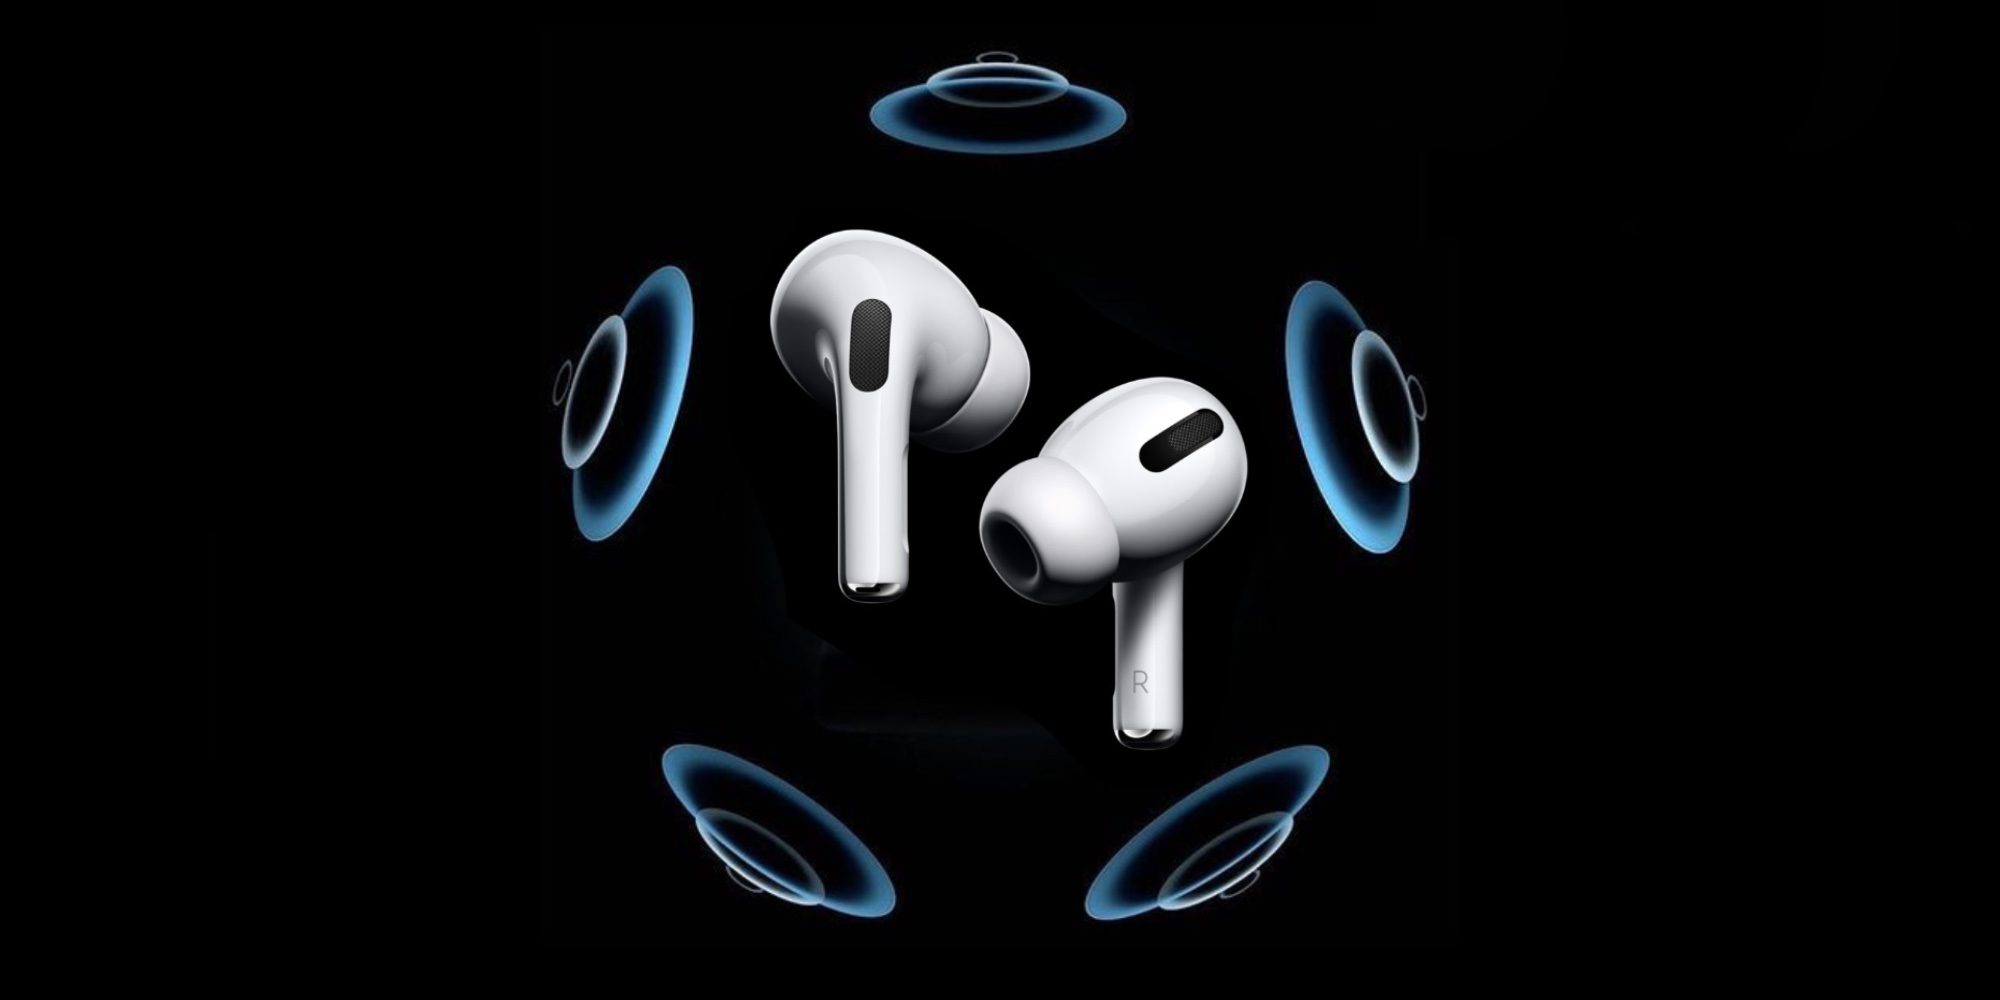 AirPods Pro audio spatial